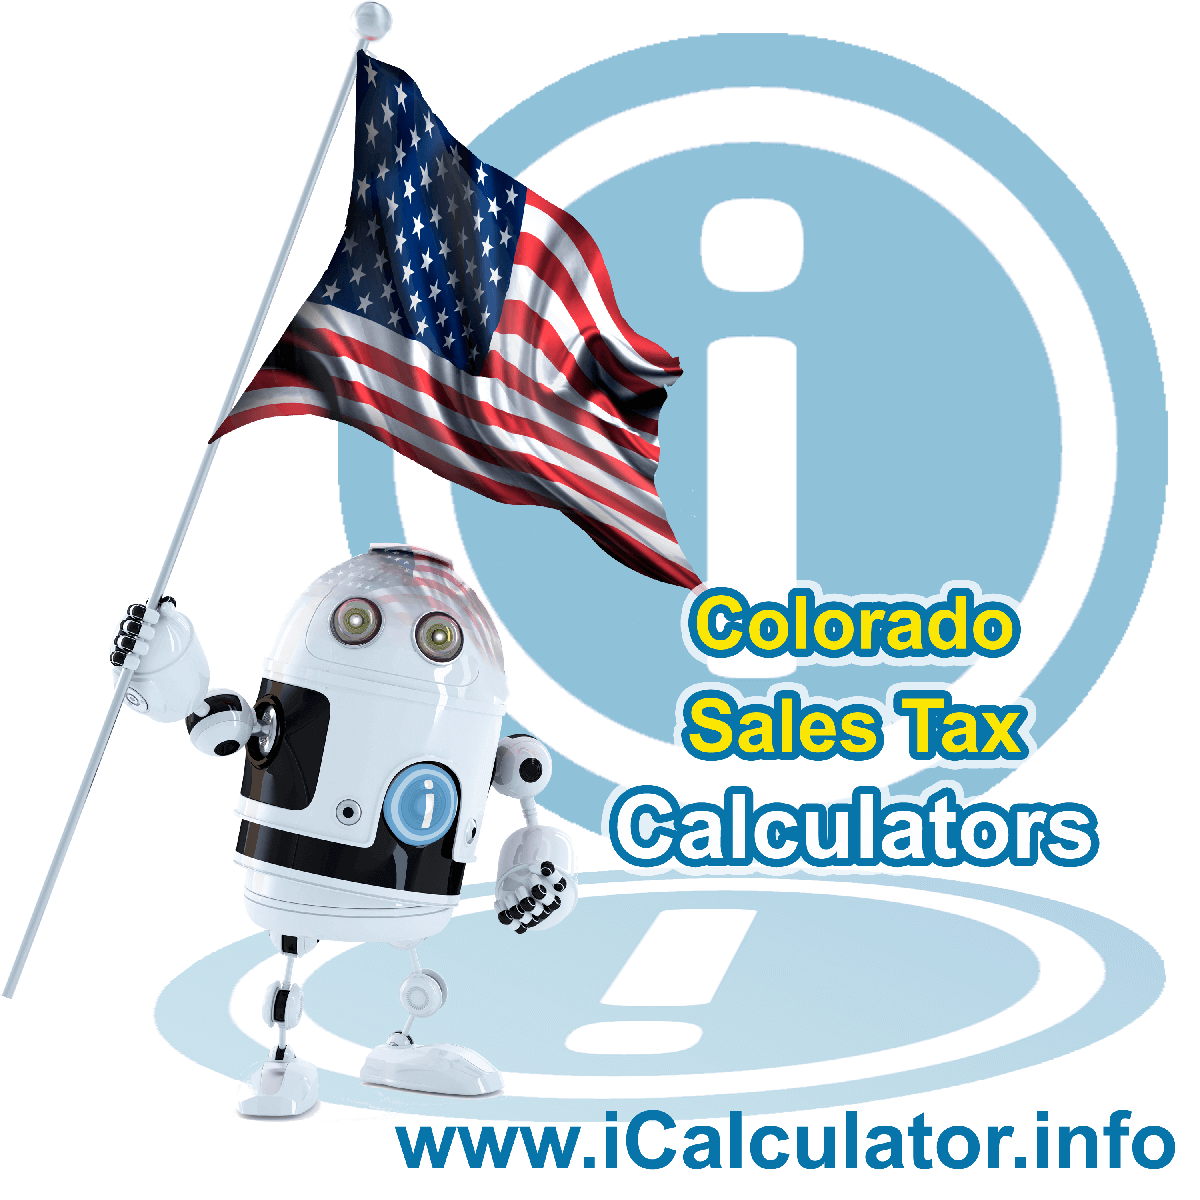 Gill Sales Rates: This image illustrates a calculator robot calculating Gill sales tax manually using the Gill Sales Tax Formula. You can use this information to calculate Gill Sales Tax manually or use the Gill Sales Tax Calculator to calculate sales tax online.